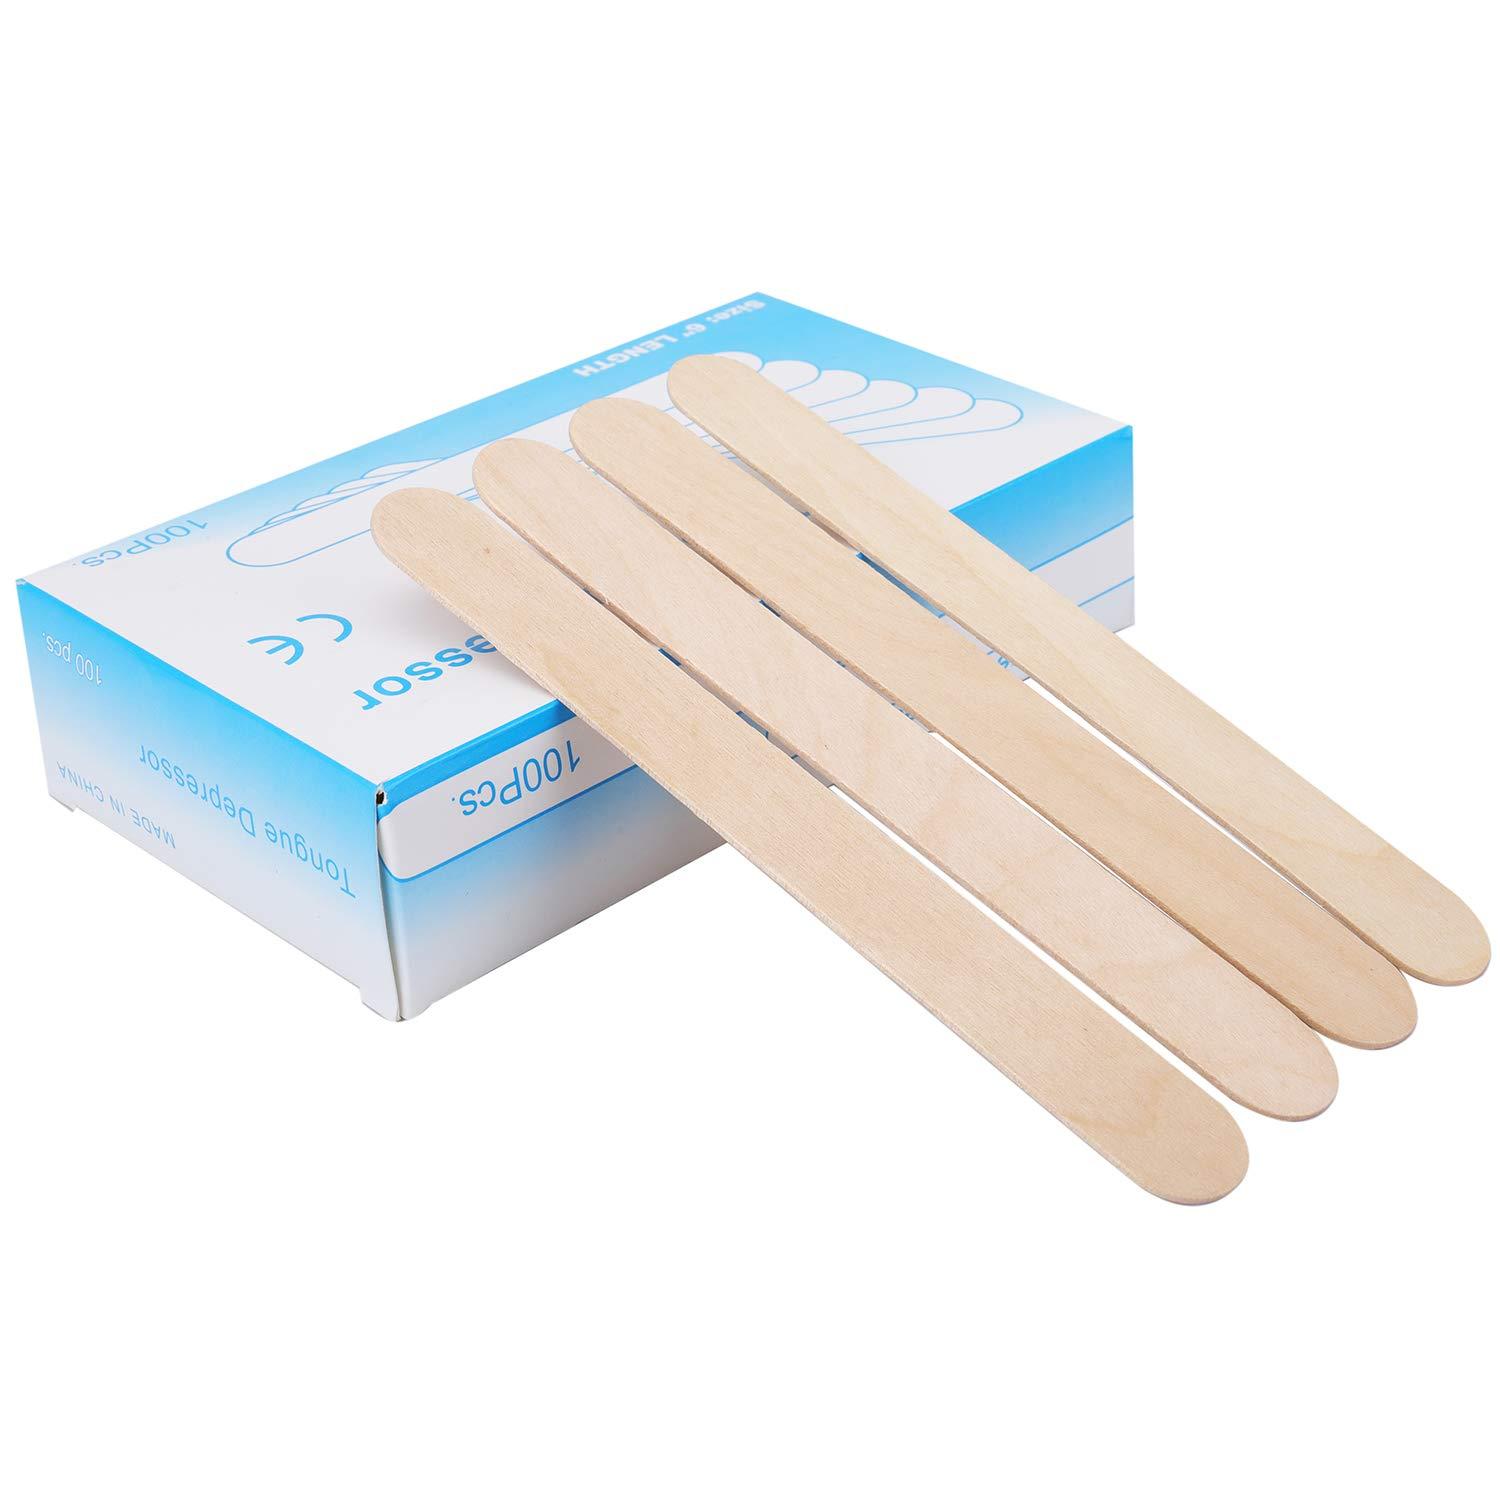  SILMII 100 Pack Large Wax Sticks Wood Waxing Spatulas Wax  Applicators for Body Hair Removal Durable Spatulas Craft Sticks Popsicle  Stick for DIY : Beauty & Personal Care